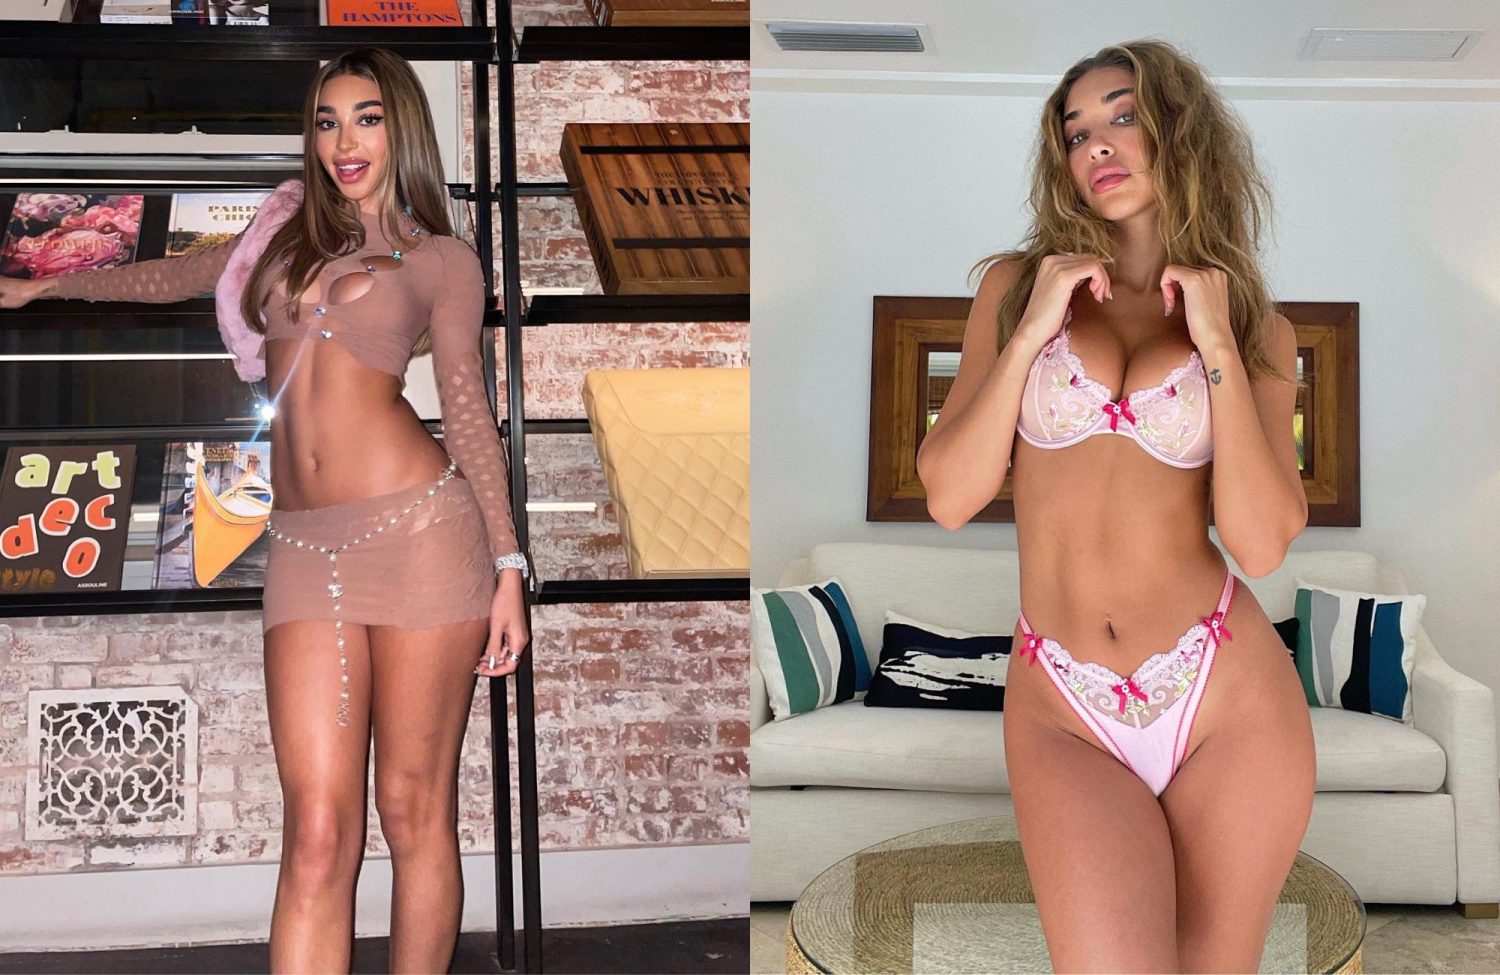 Chantel Jeffries Looking Relaxed In Cute Bra And Tight Pants